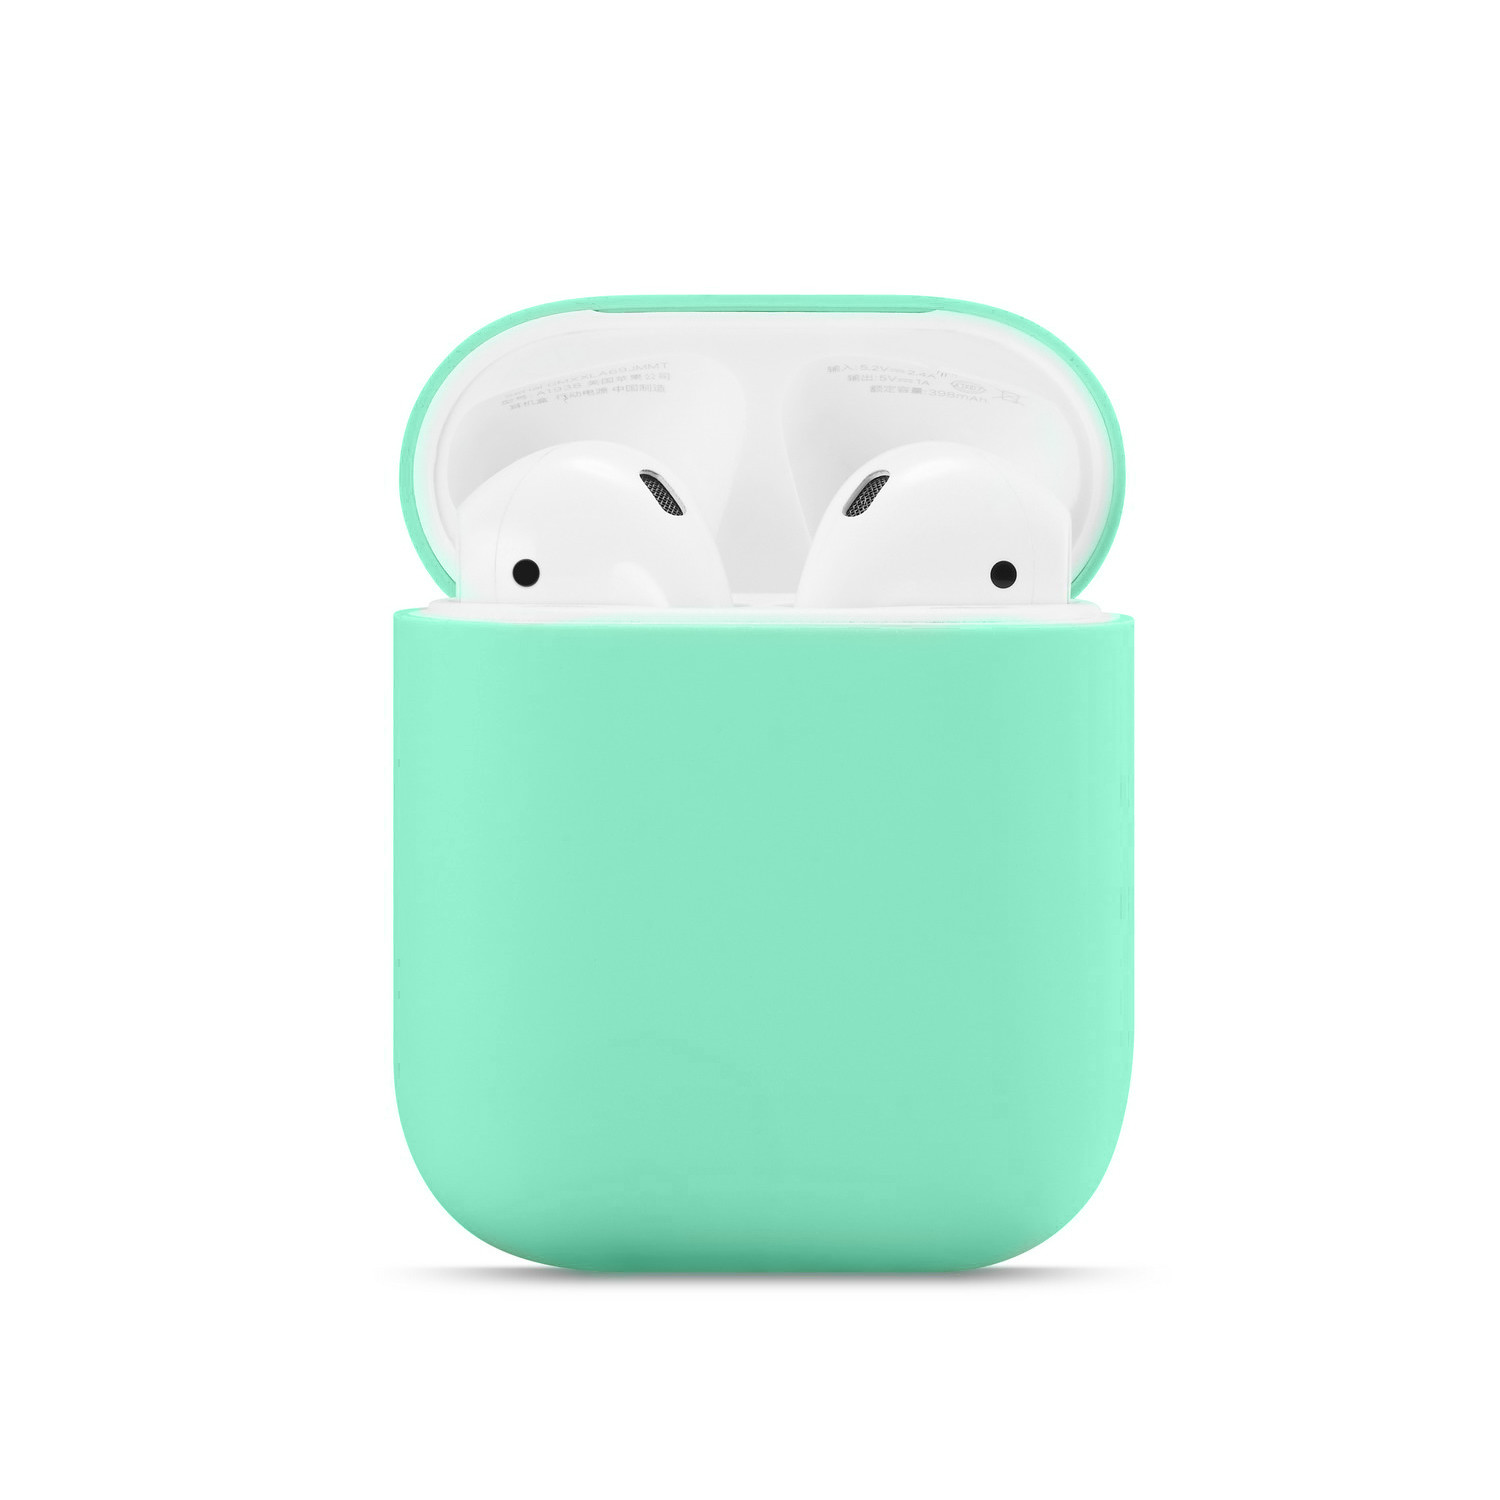 Original Silicone Case for AirPods Spearmint Green (12) - 3